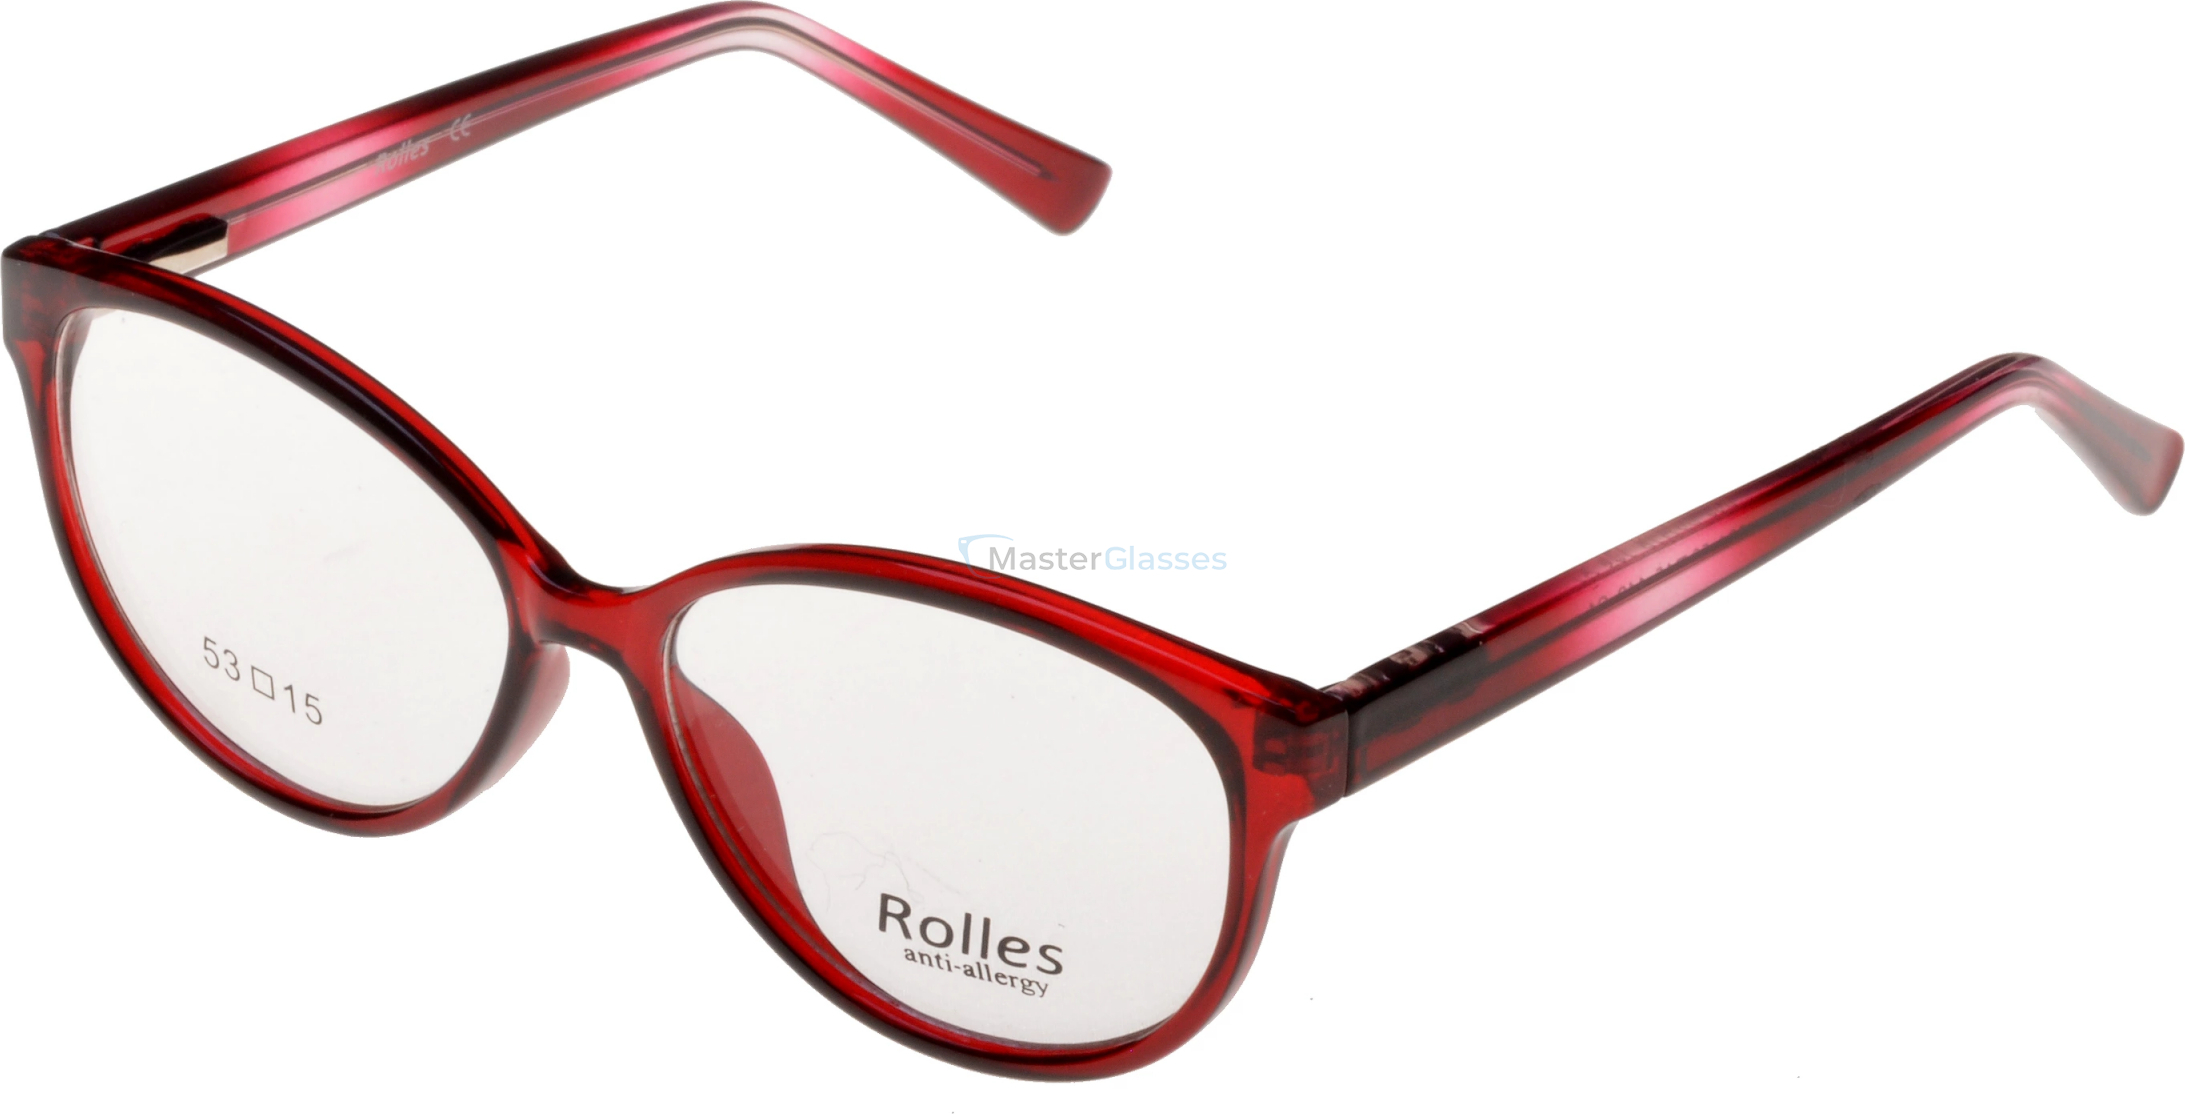  Rolles 534 01